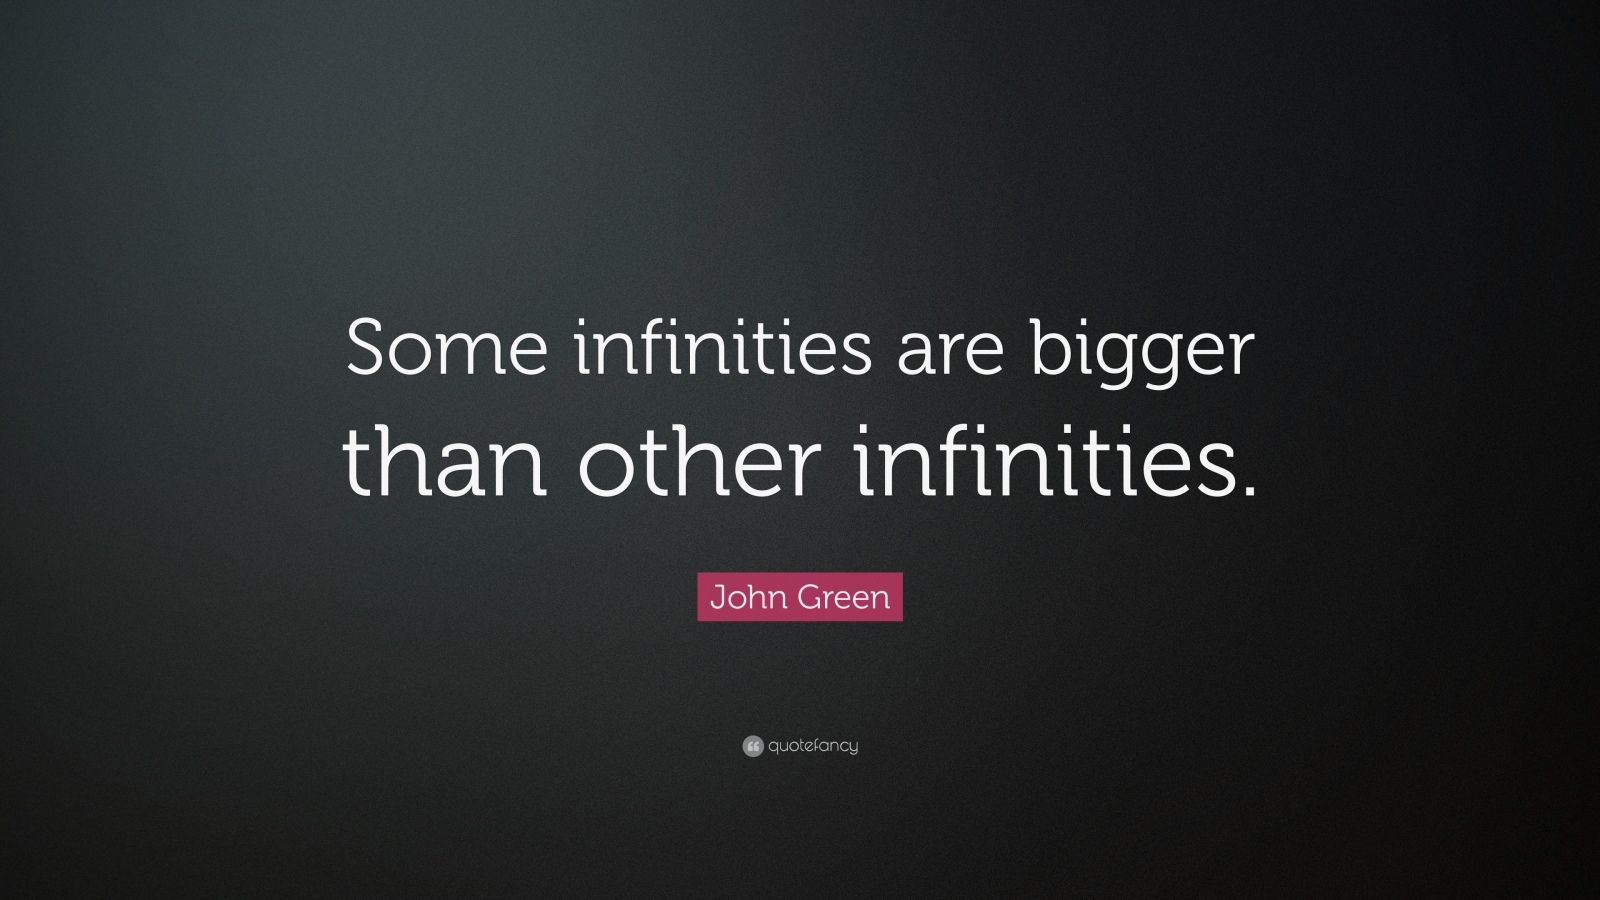 John Green Quote: “Some infinities are bigger than other infinities ...